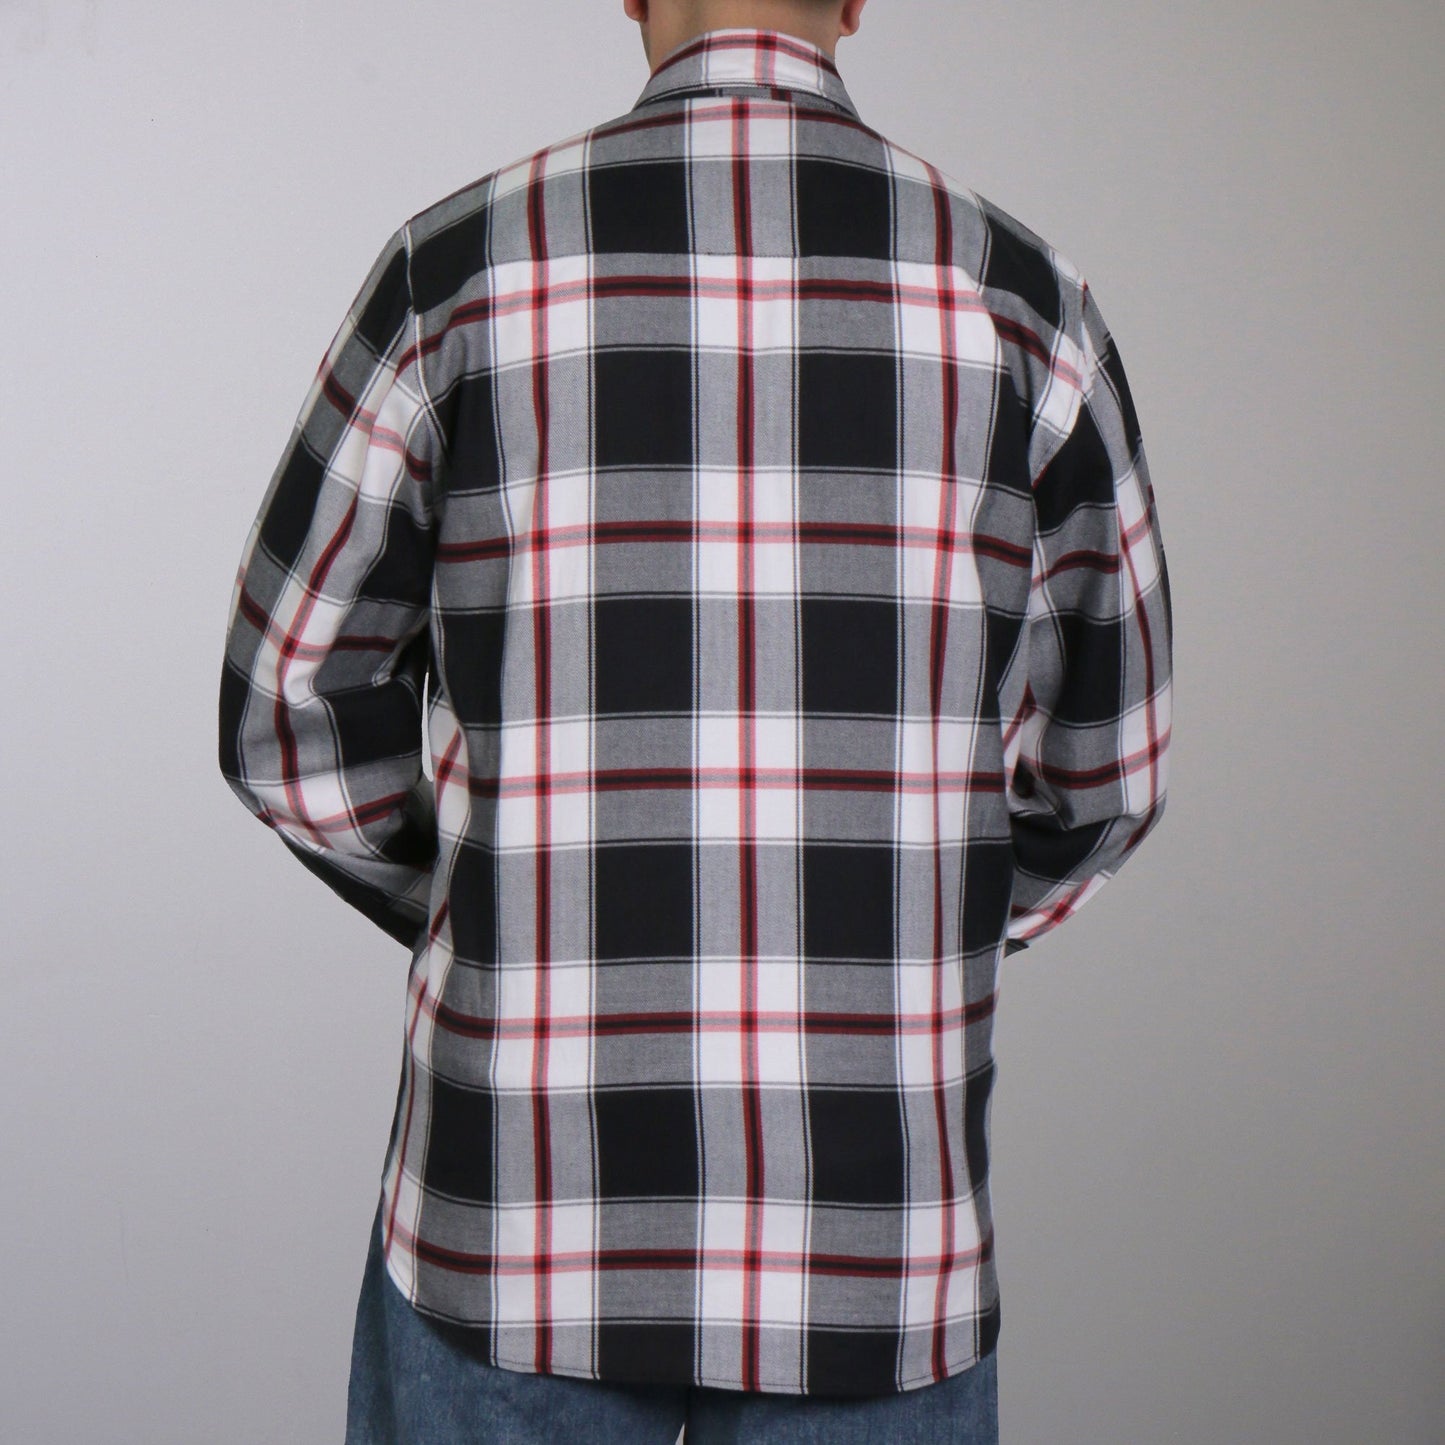 Hot Leathers FLM2003 Men's Black White and Red Long Sleeve Flannel Shirt